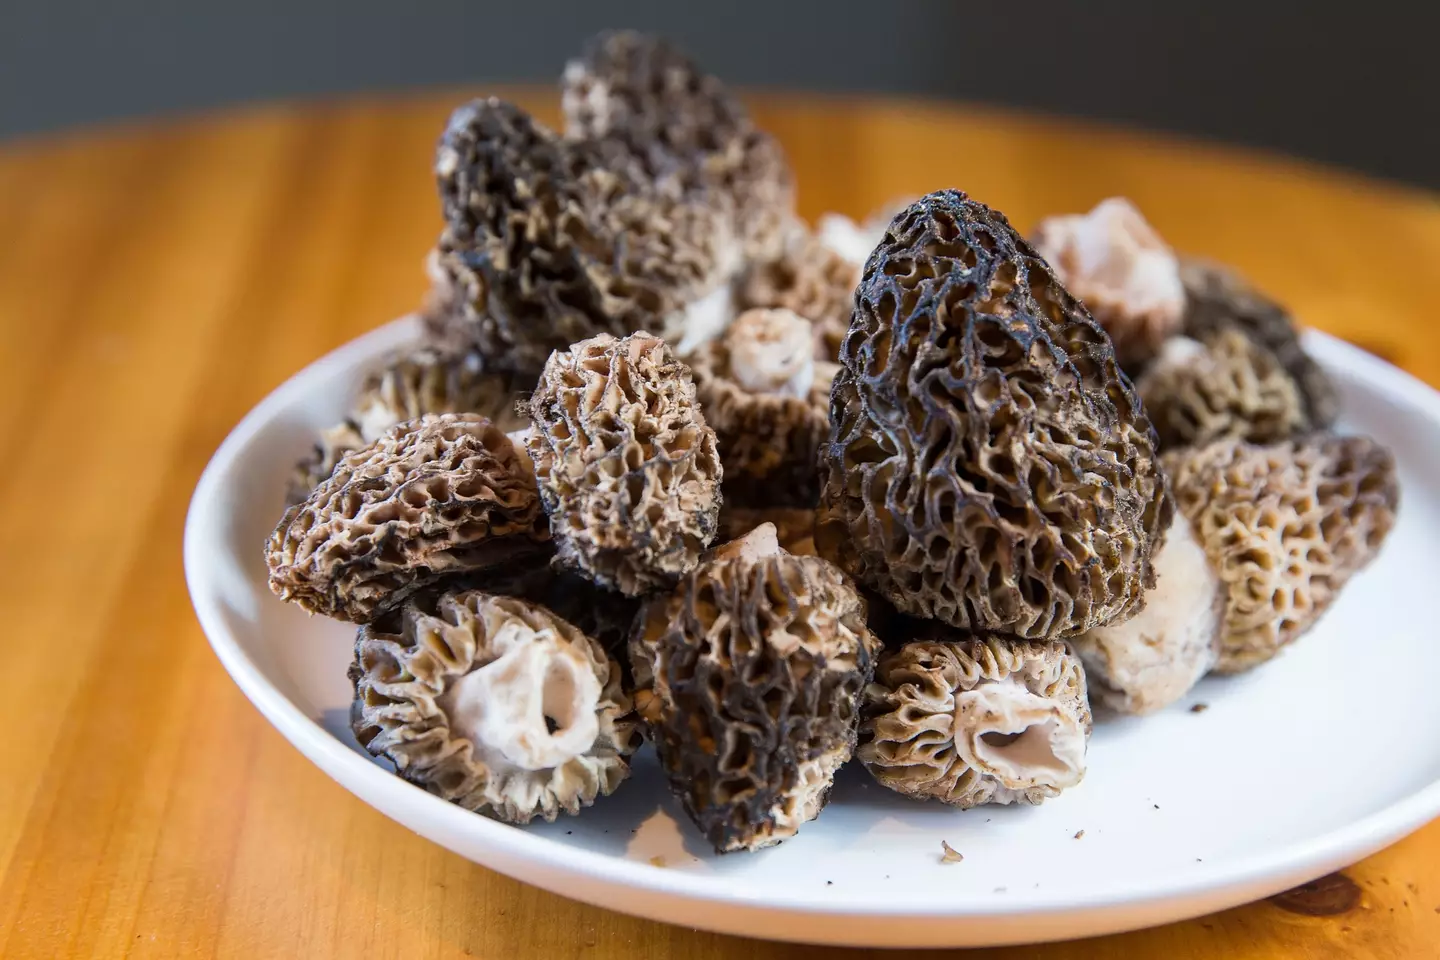 Morel mushrooms are fine to consume cooked, not raw. (Suzi Pratt / Getty Images)